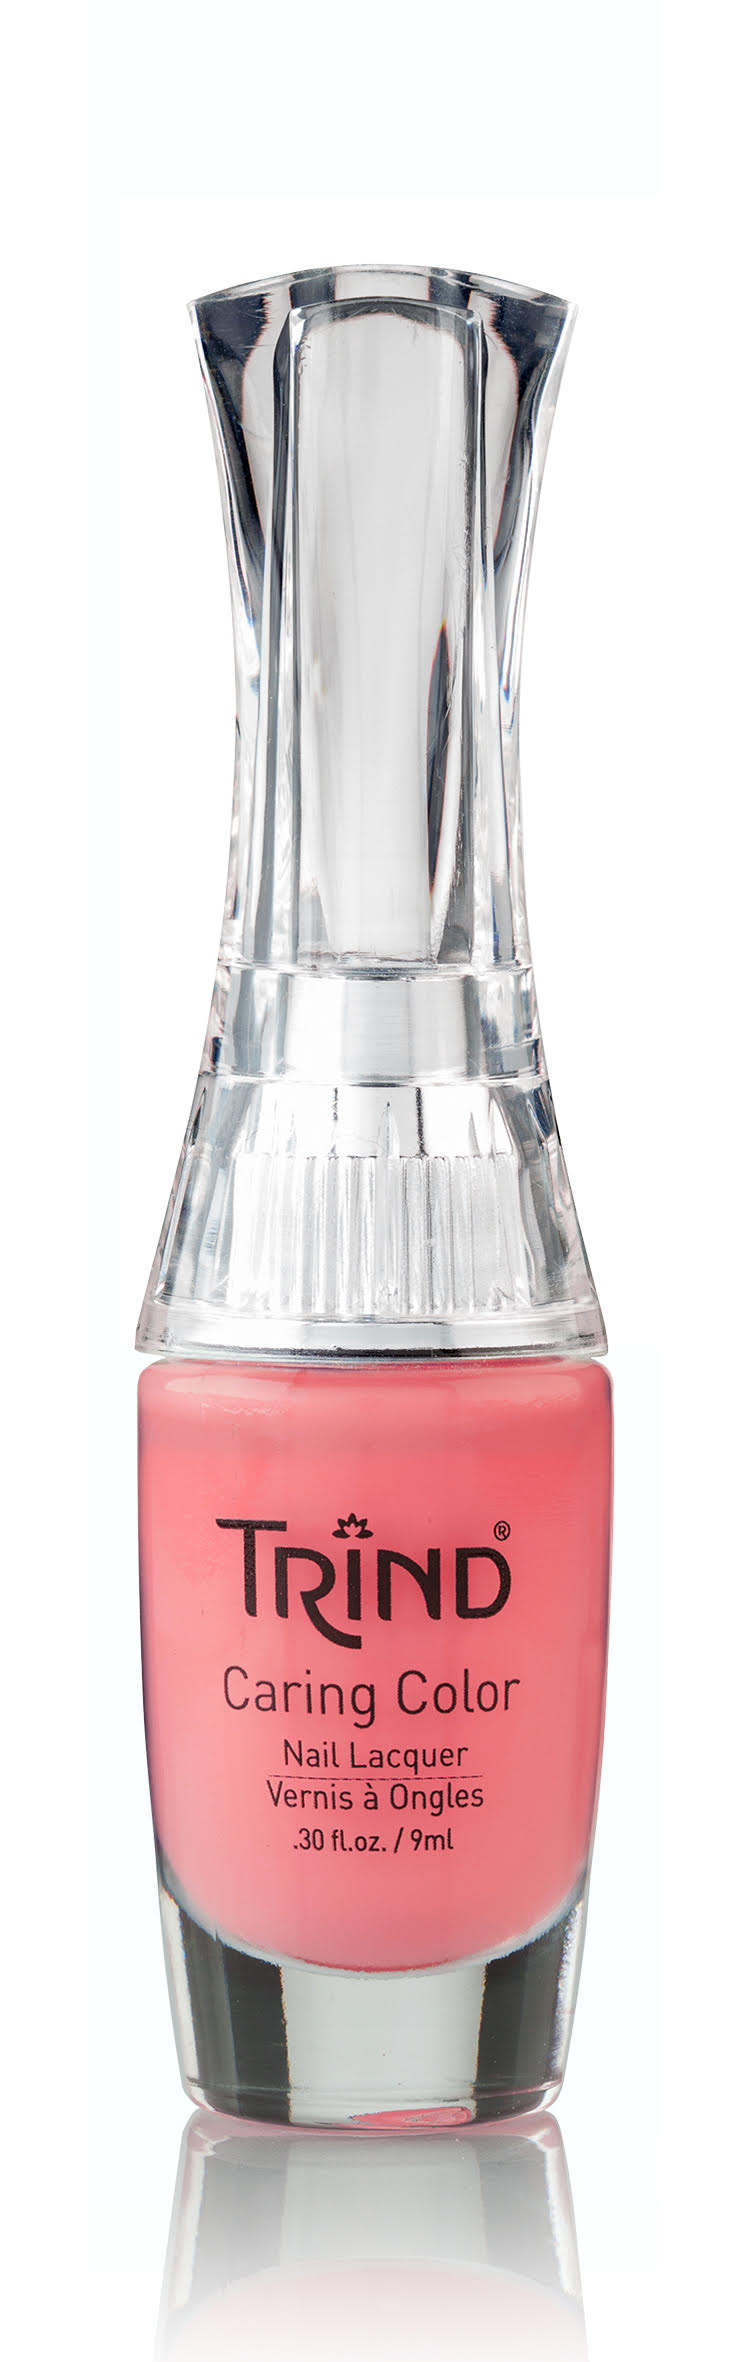 Trind Caring Color Nail Lacquer CC211